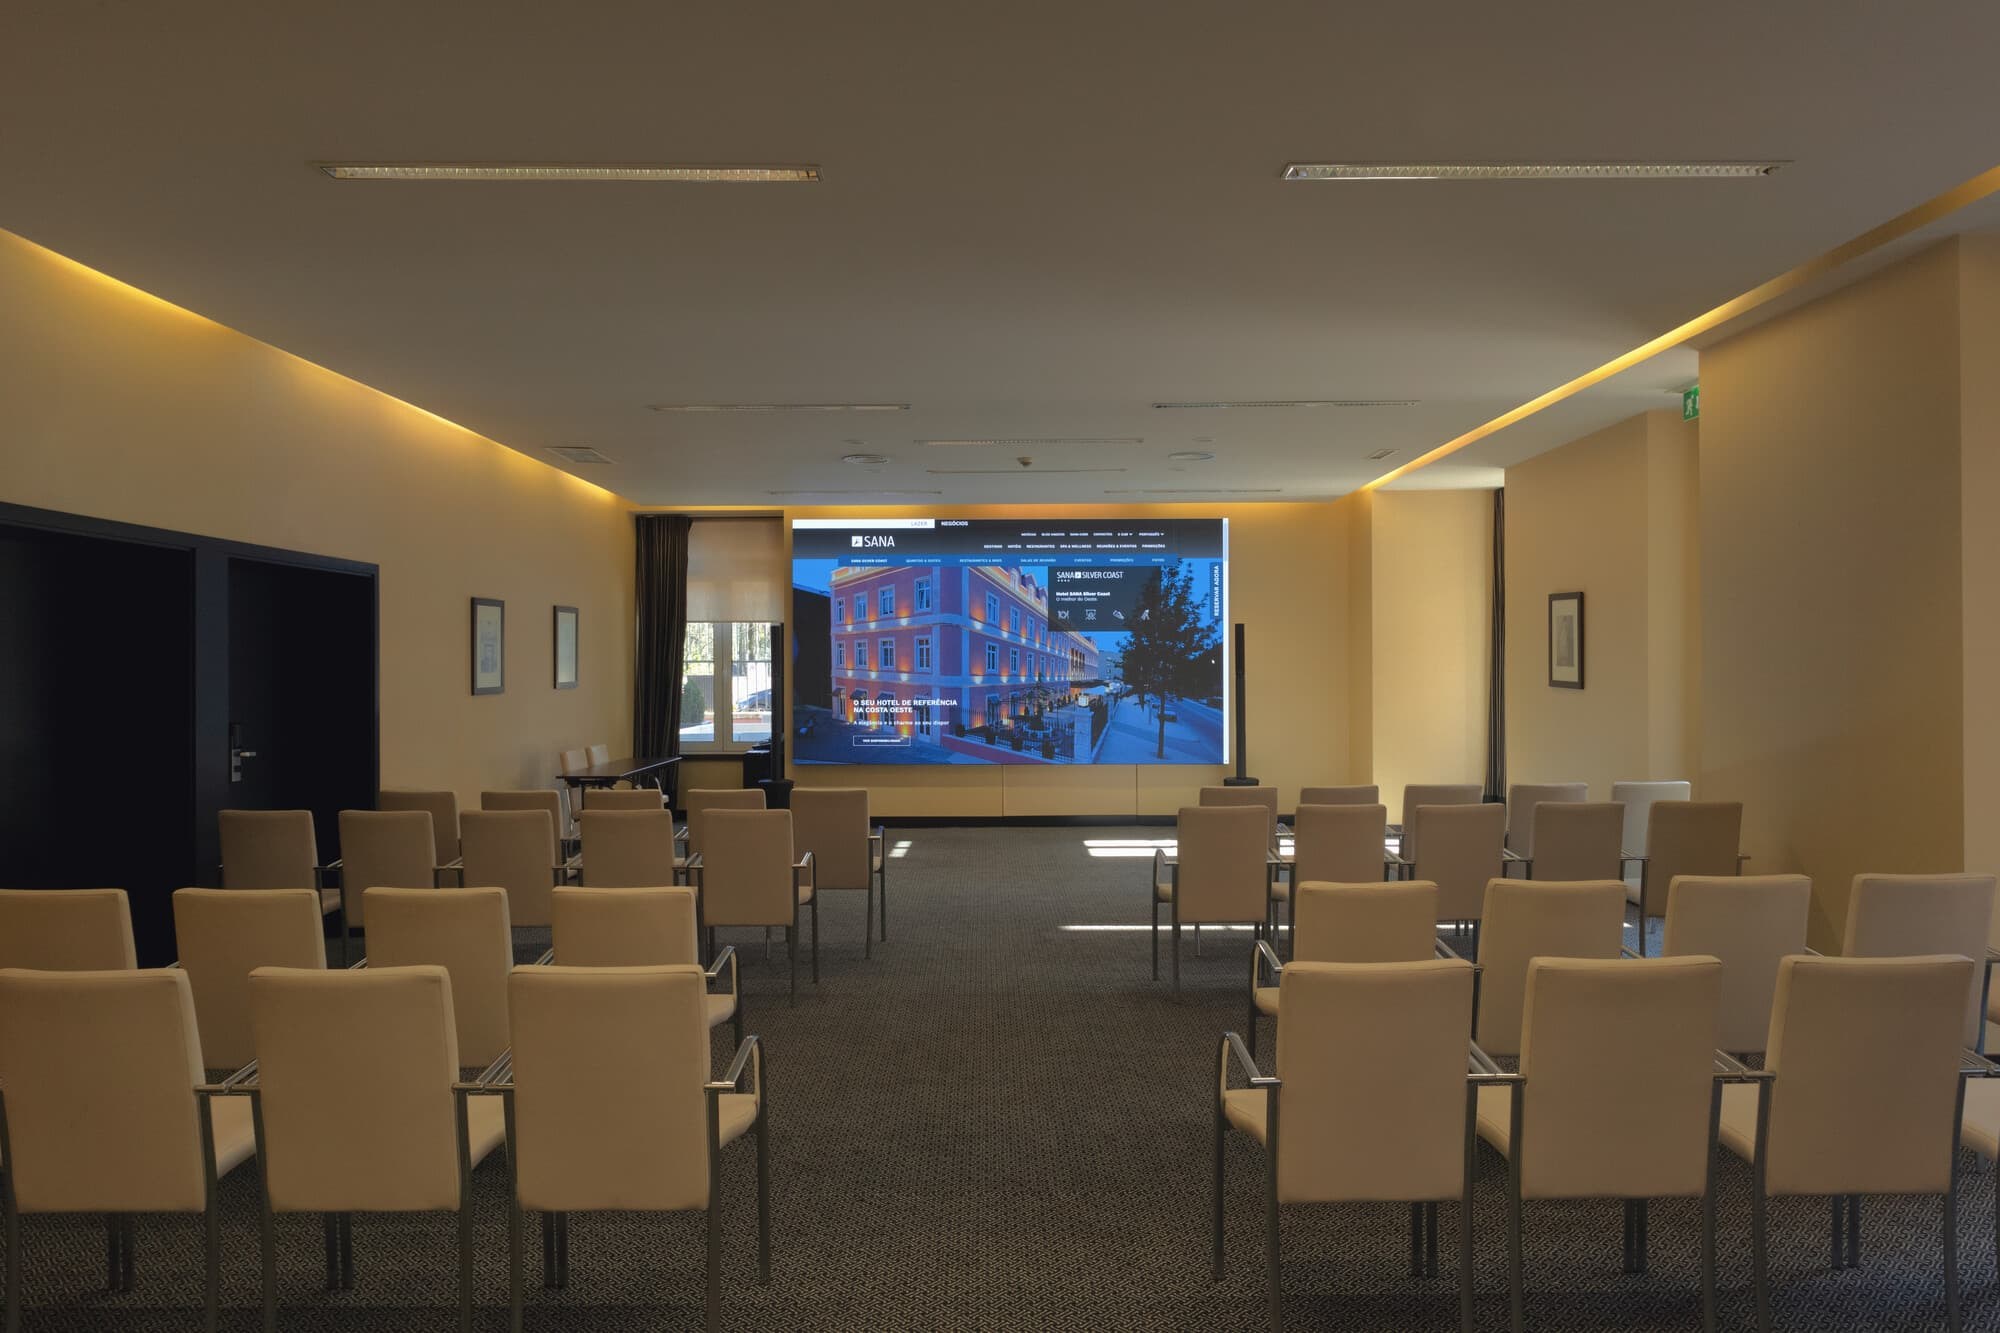 Meeting Room with Ledwall